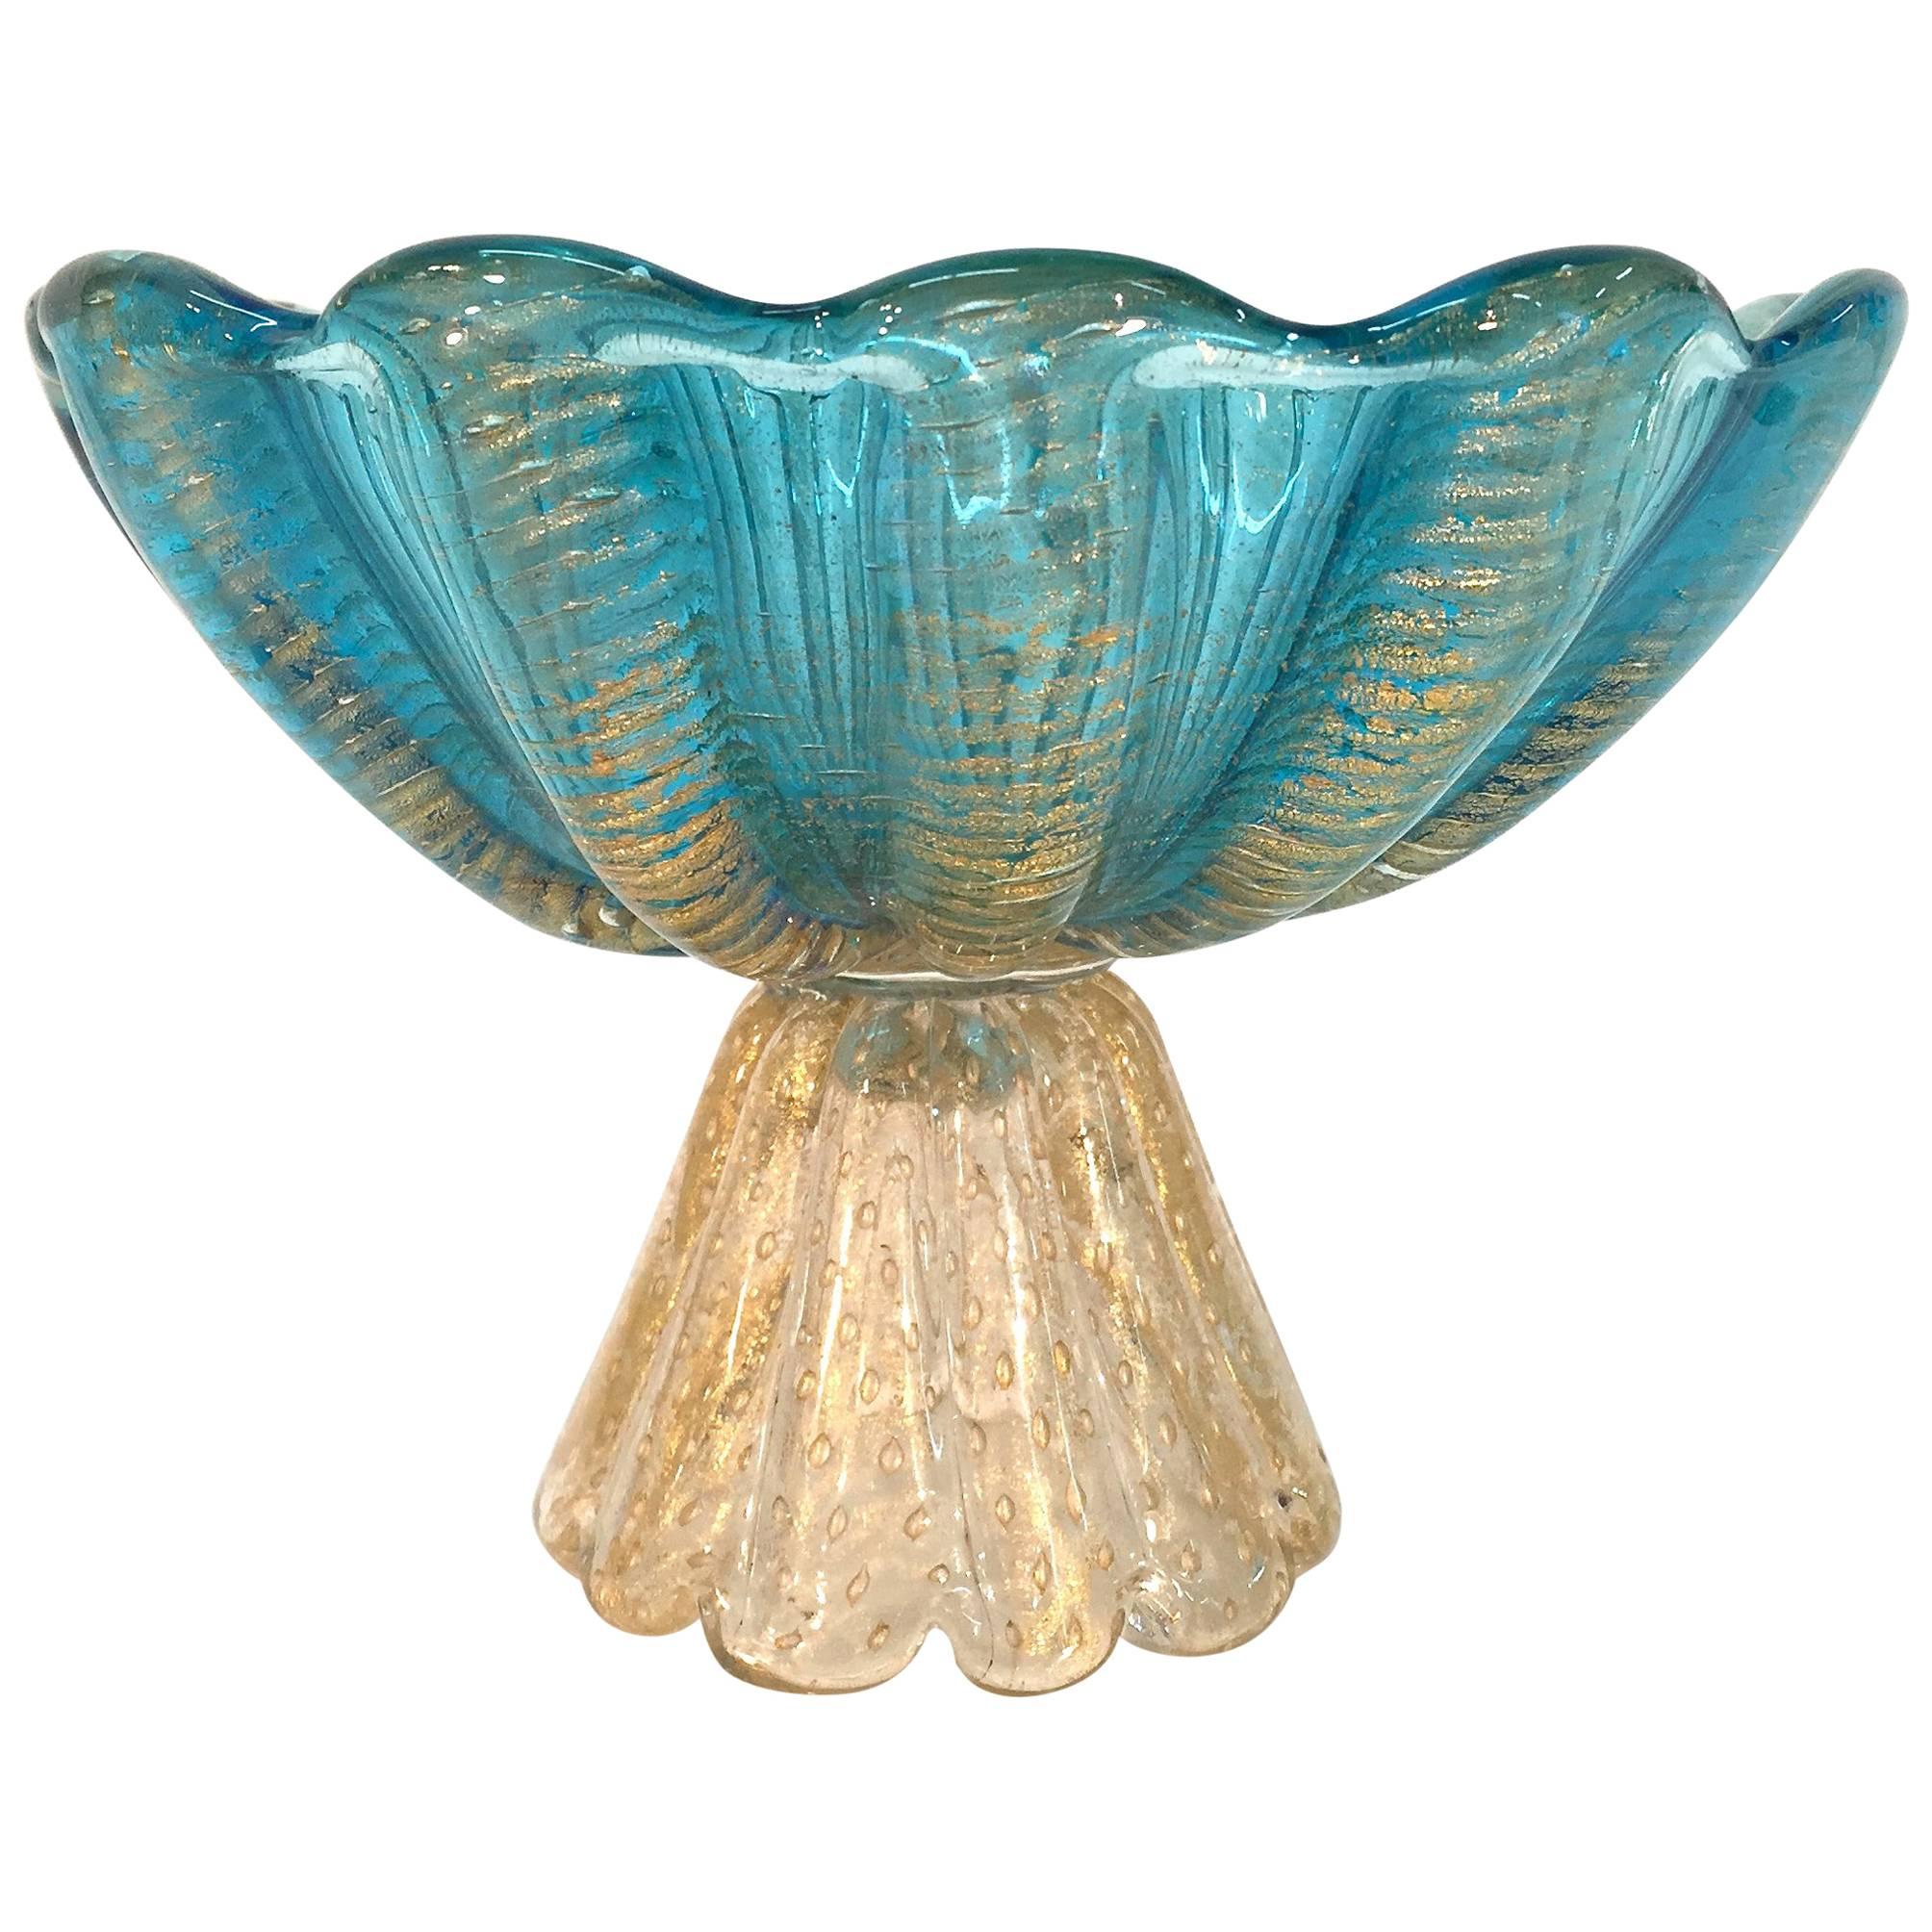 Ercole Barovier Murano Italian Art Glass Footed Compote Bowl For Sale